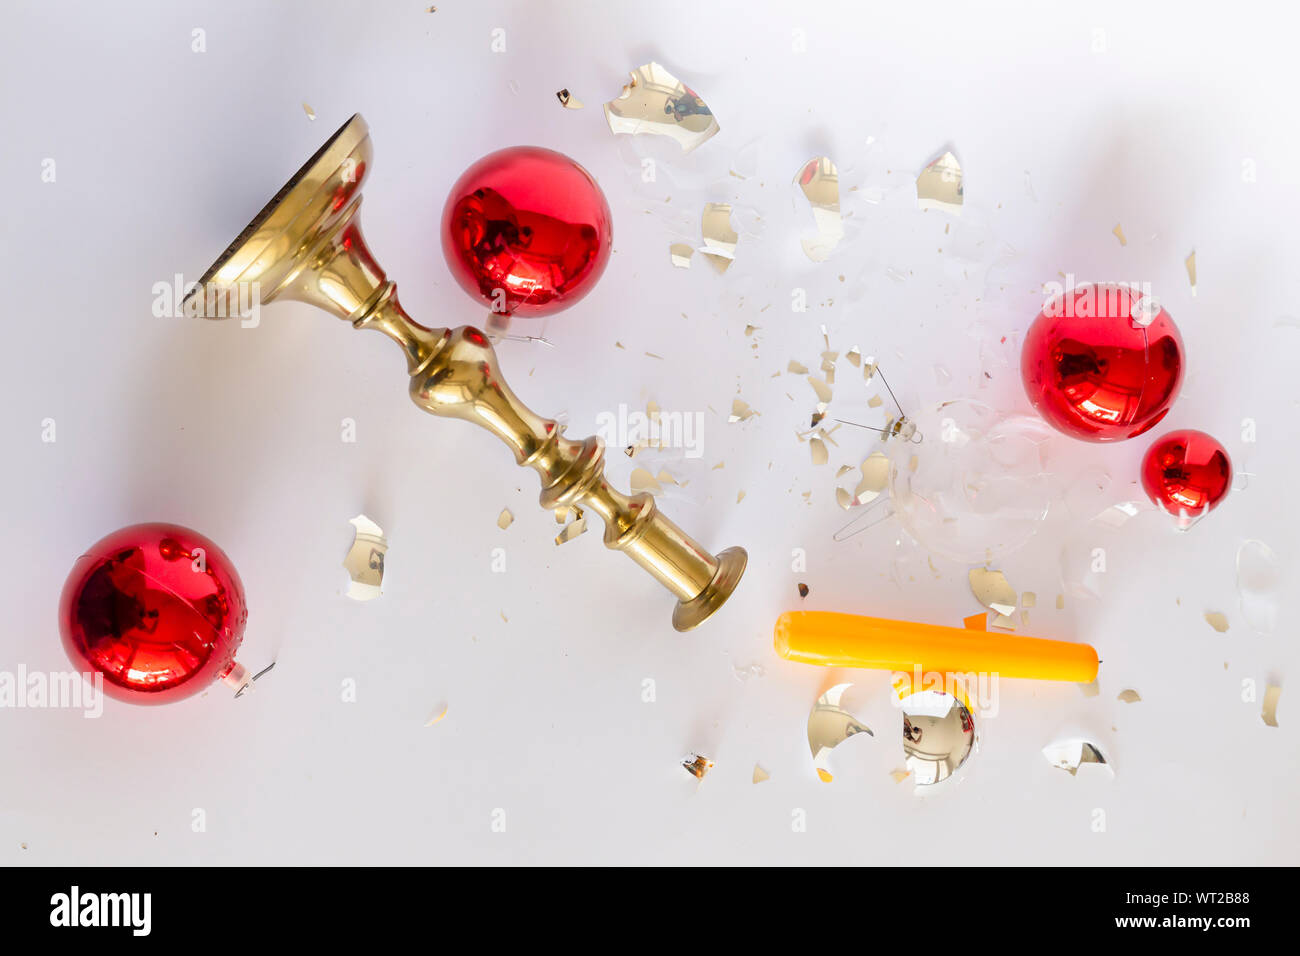 Top view of shattered red and silver Christmas baubles and an overturned bronze candleholder with a yellow candle on white background Stock Photo